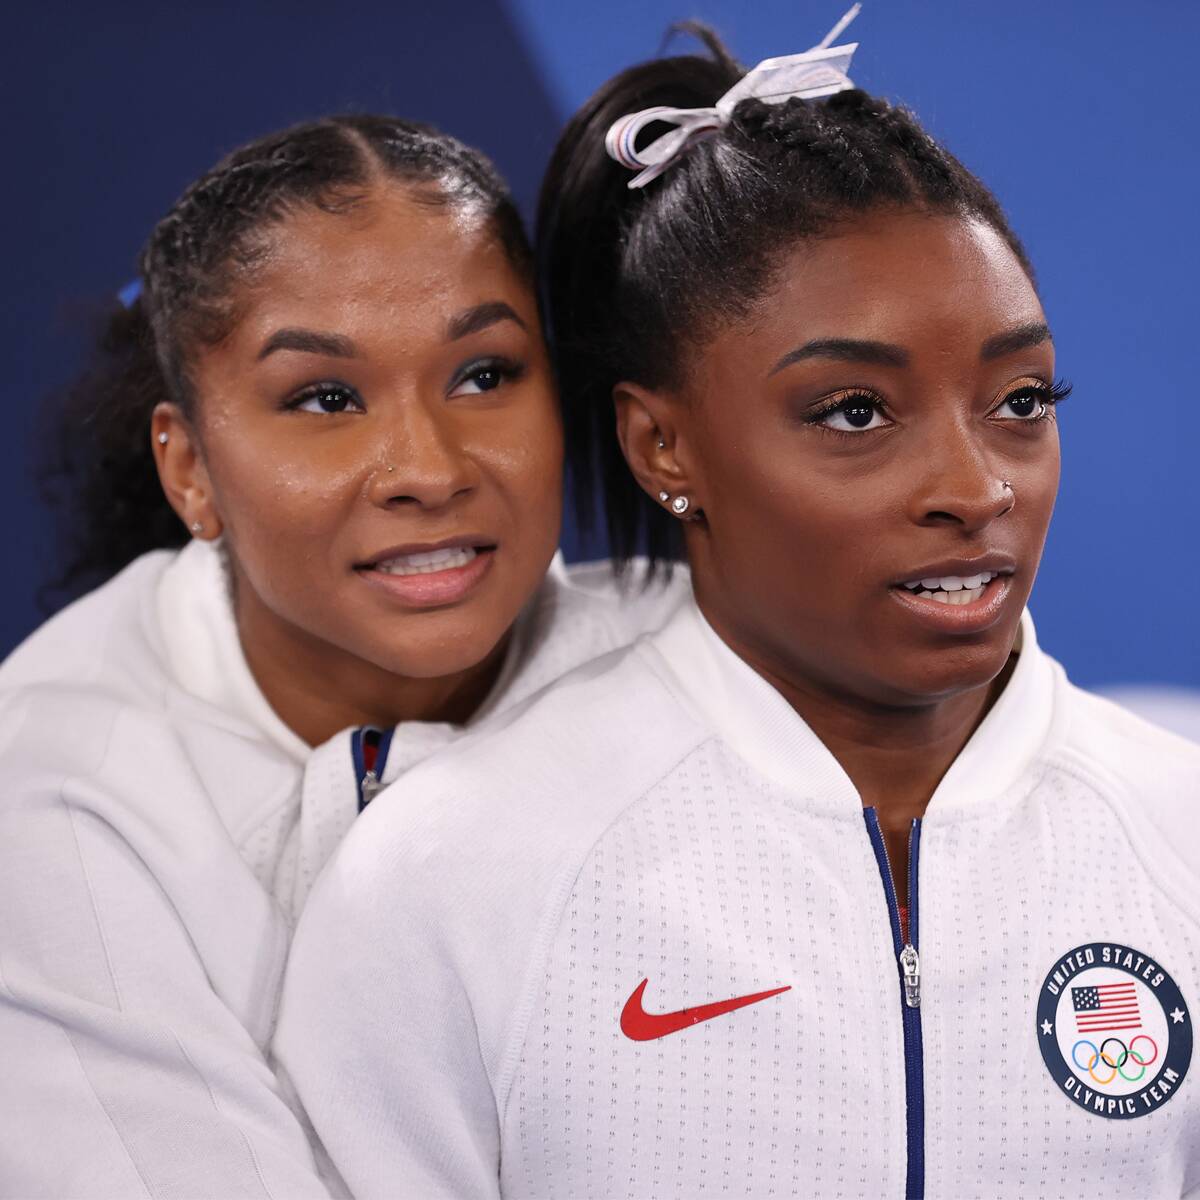 Here's How Jordan Chiles Supported BFF Simone Biles After Her Olympics Withdrawal